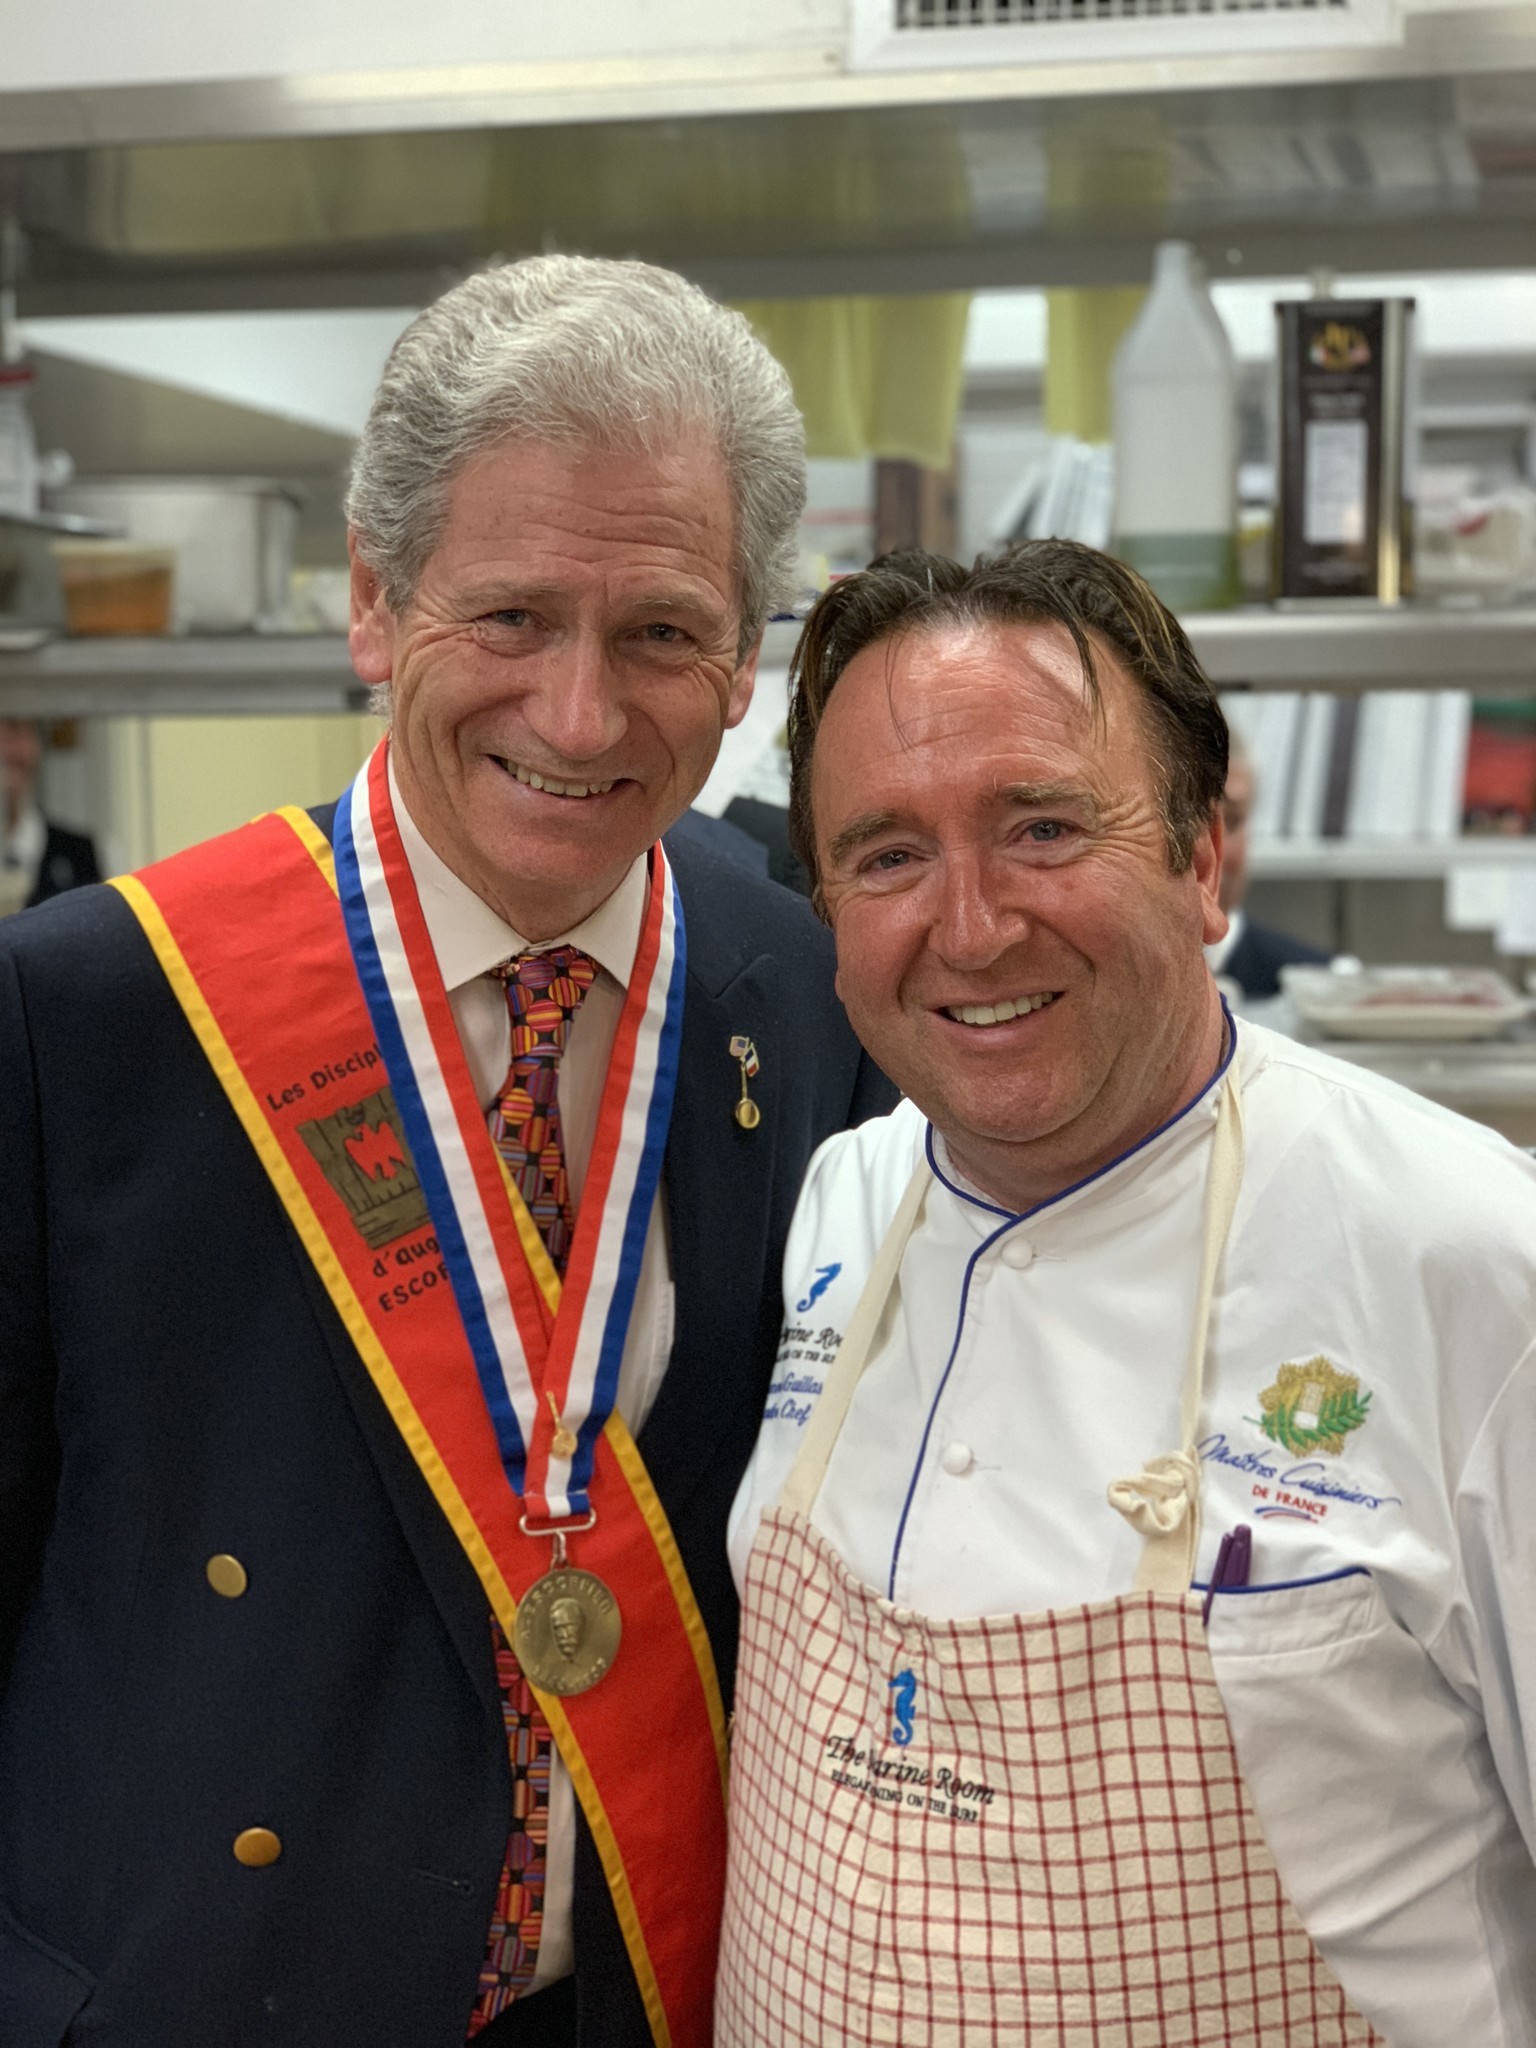 Michel Escoffier poses with Bernard Guillas in the Marine Room kitchen before the ceremony.